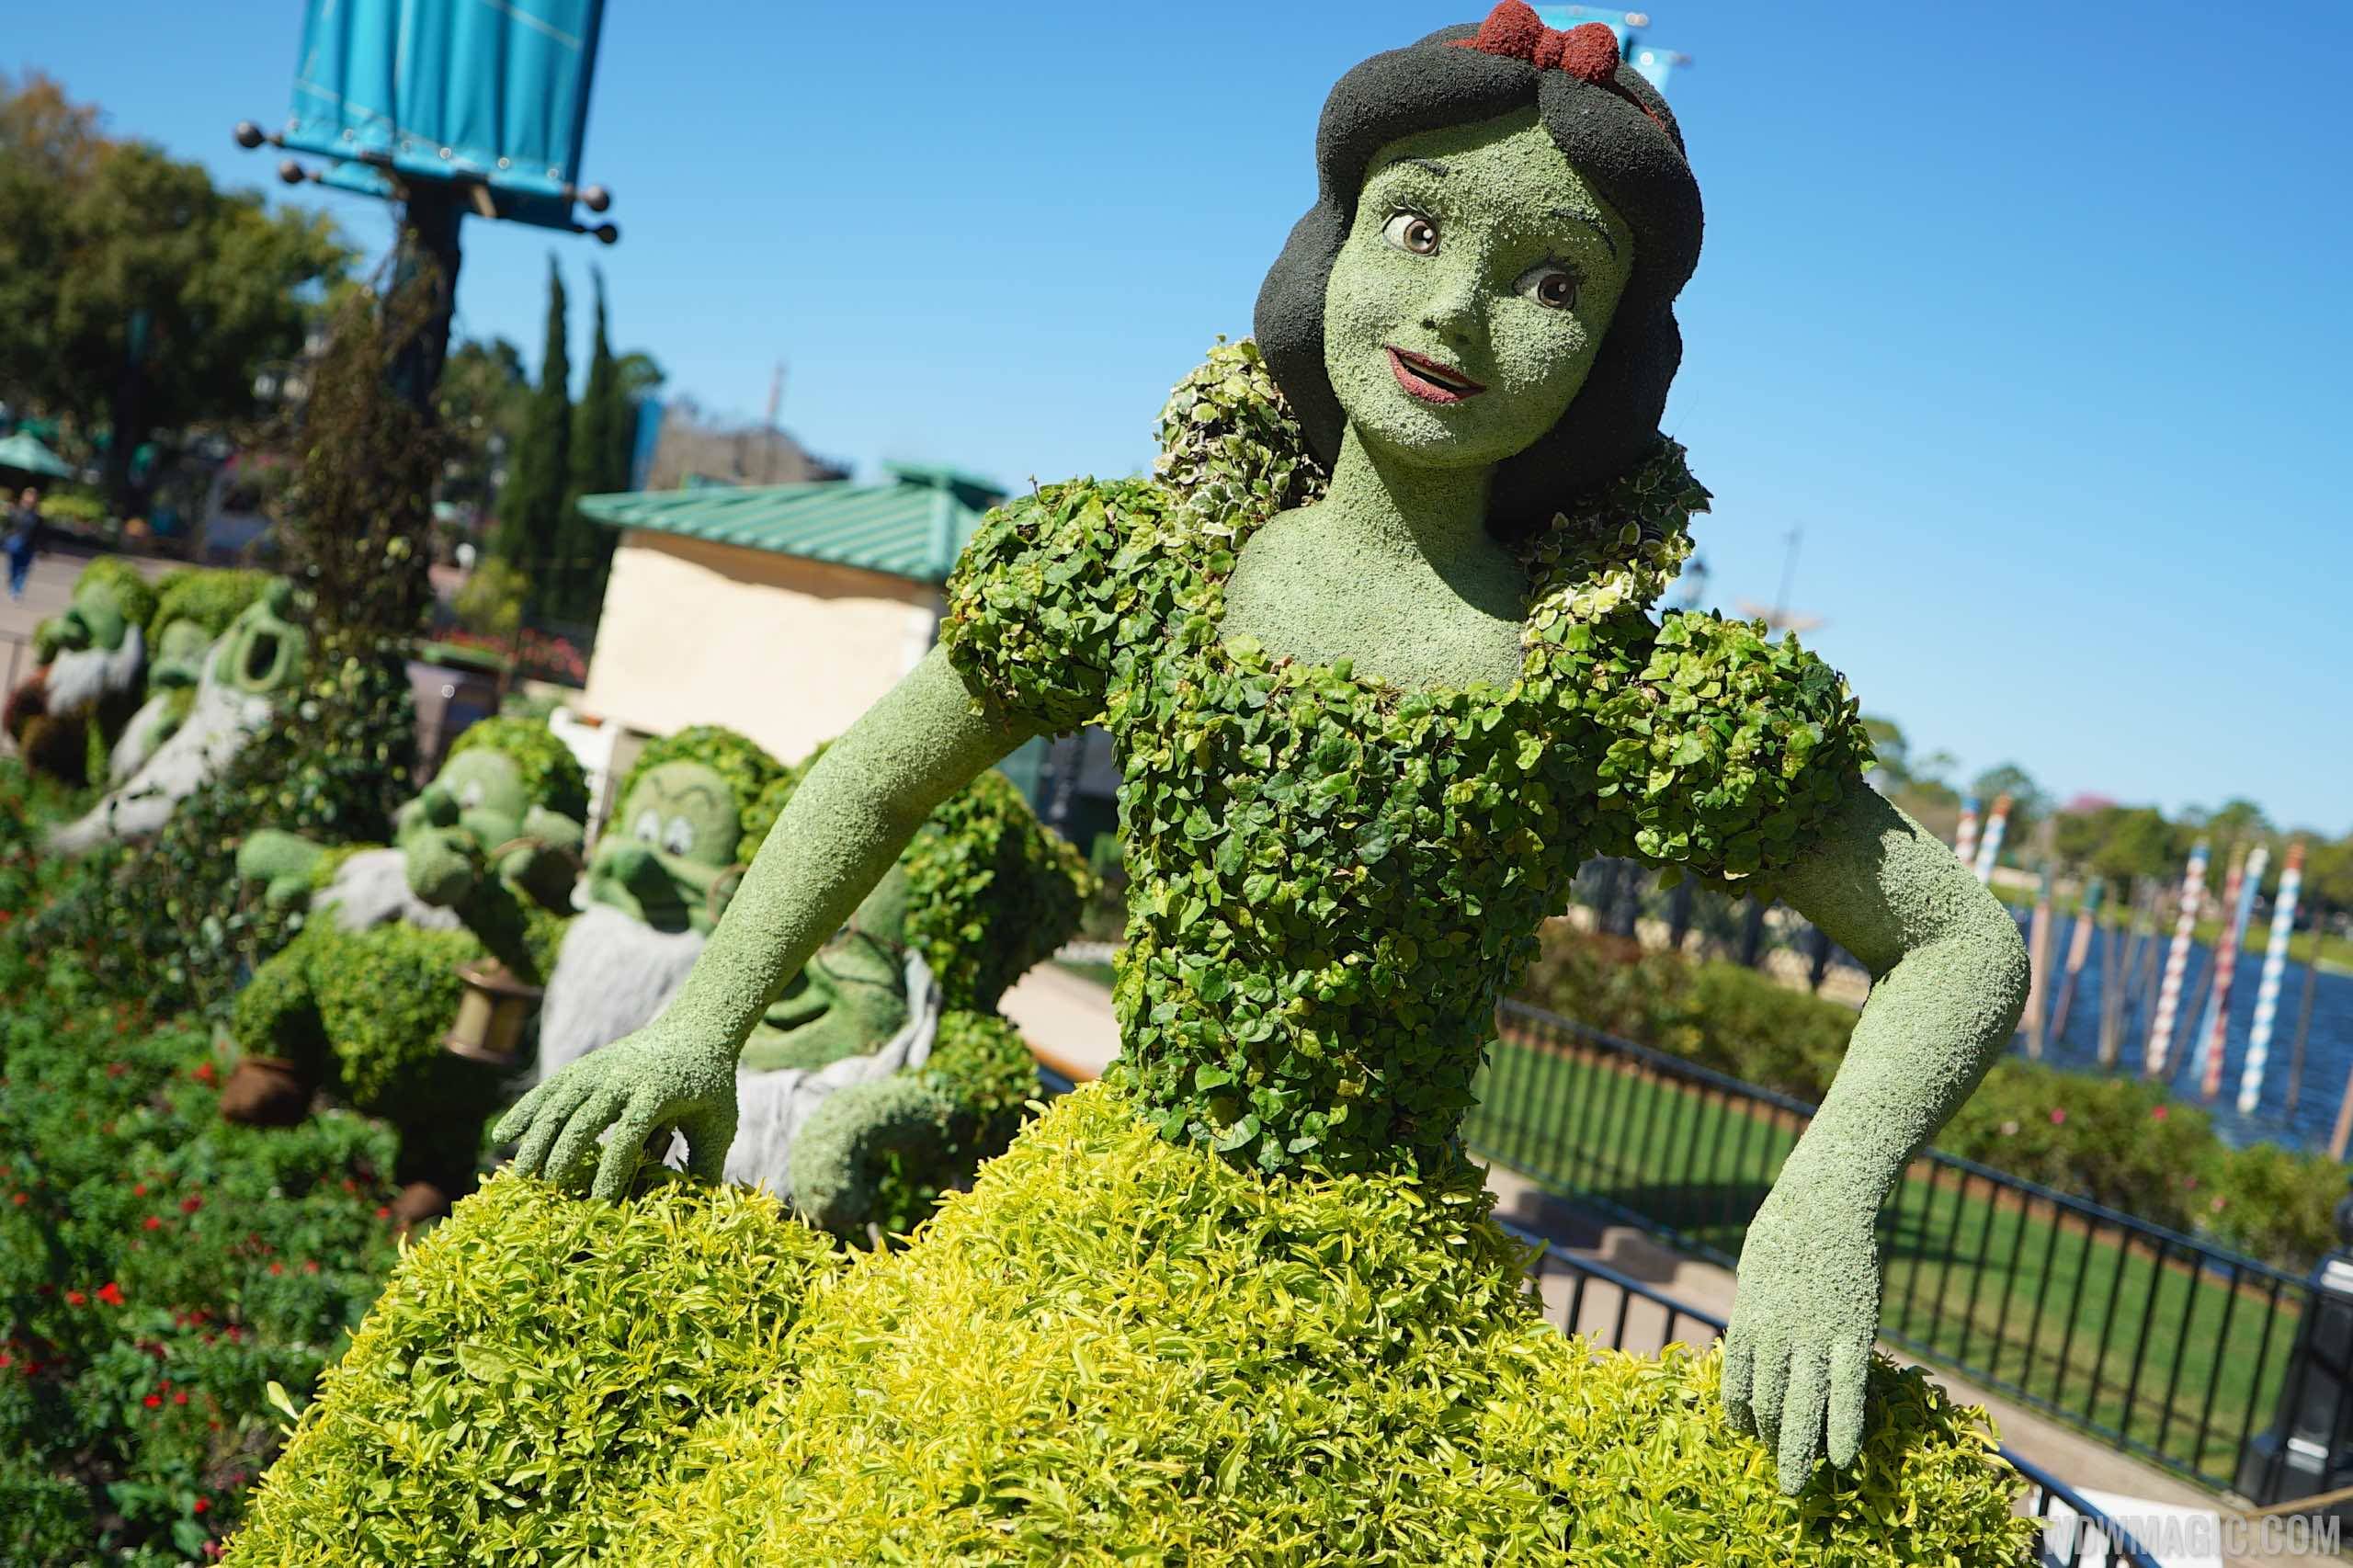 2015 Epcot Flower and Garden Festival - Snow White topiary